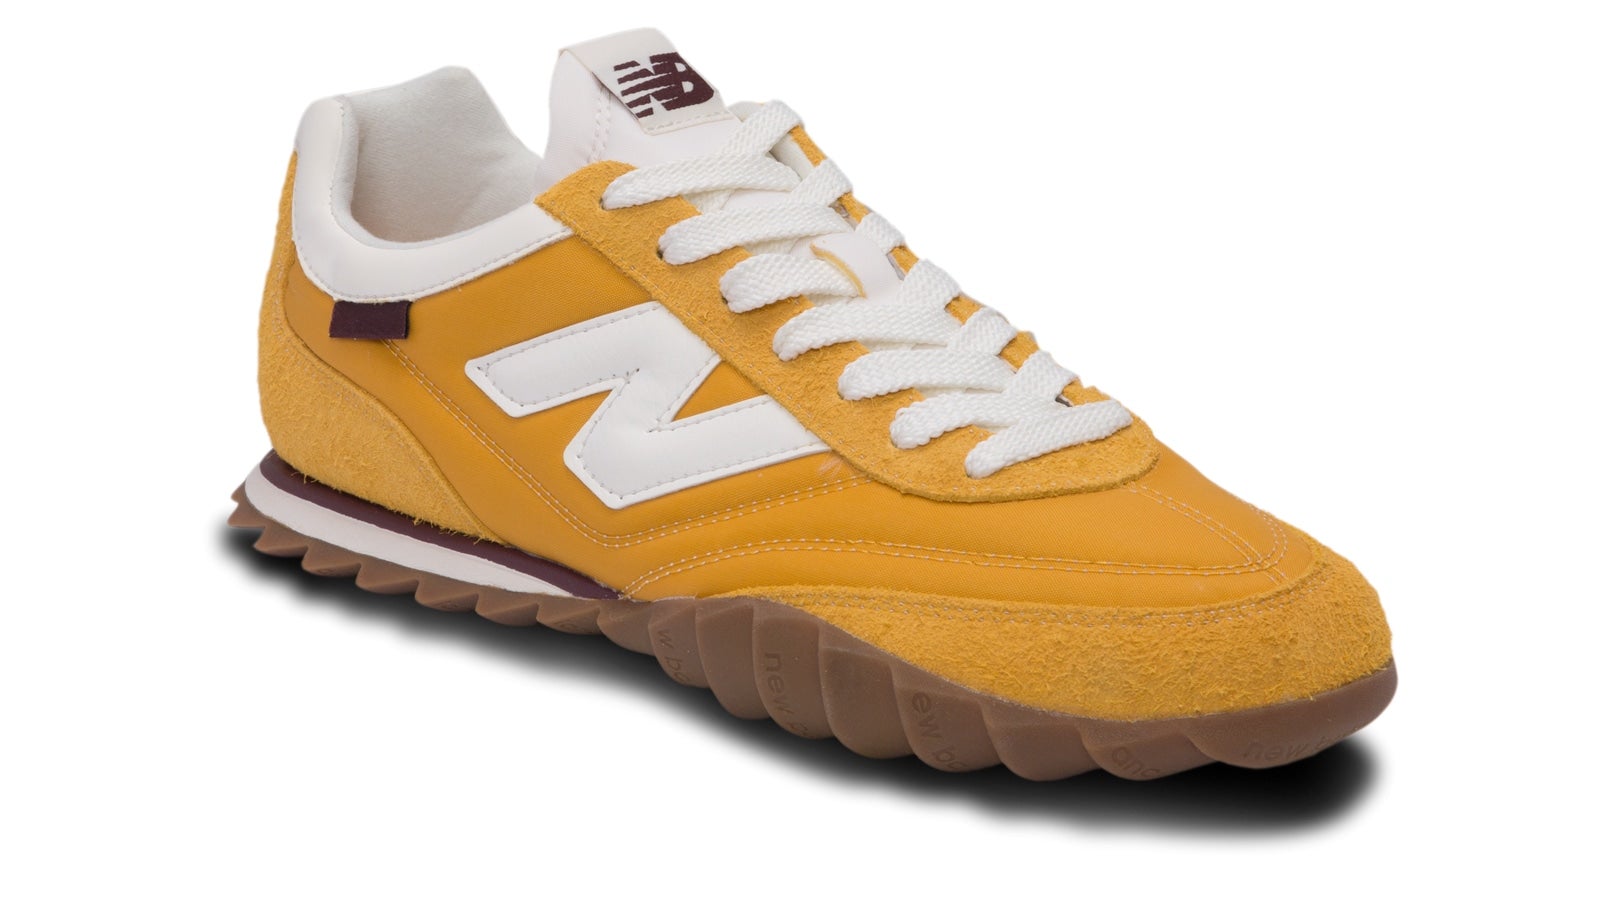 Donald Glover Presents The New Balance RC30 GG